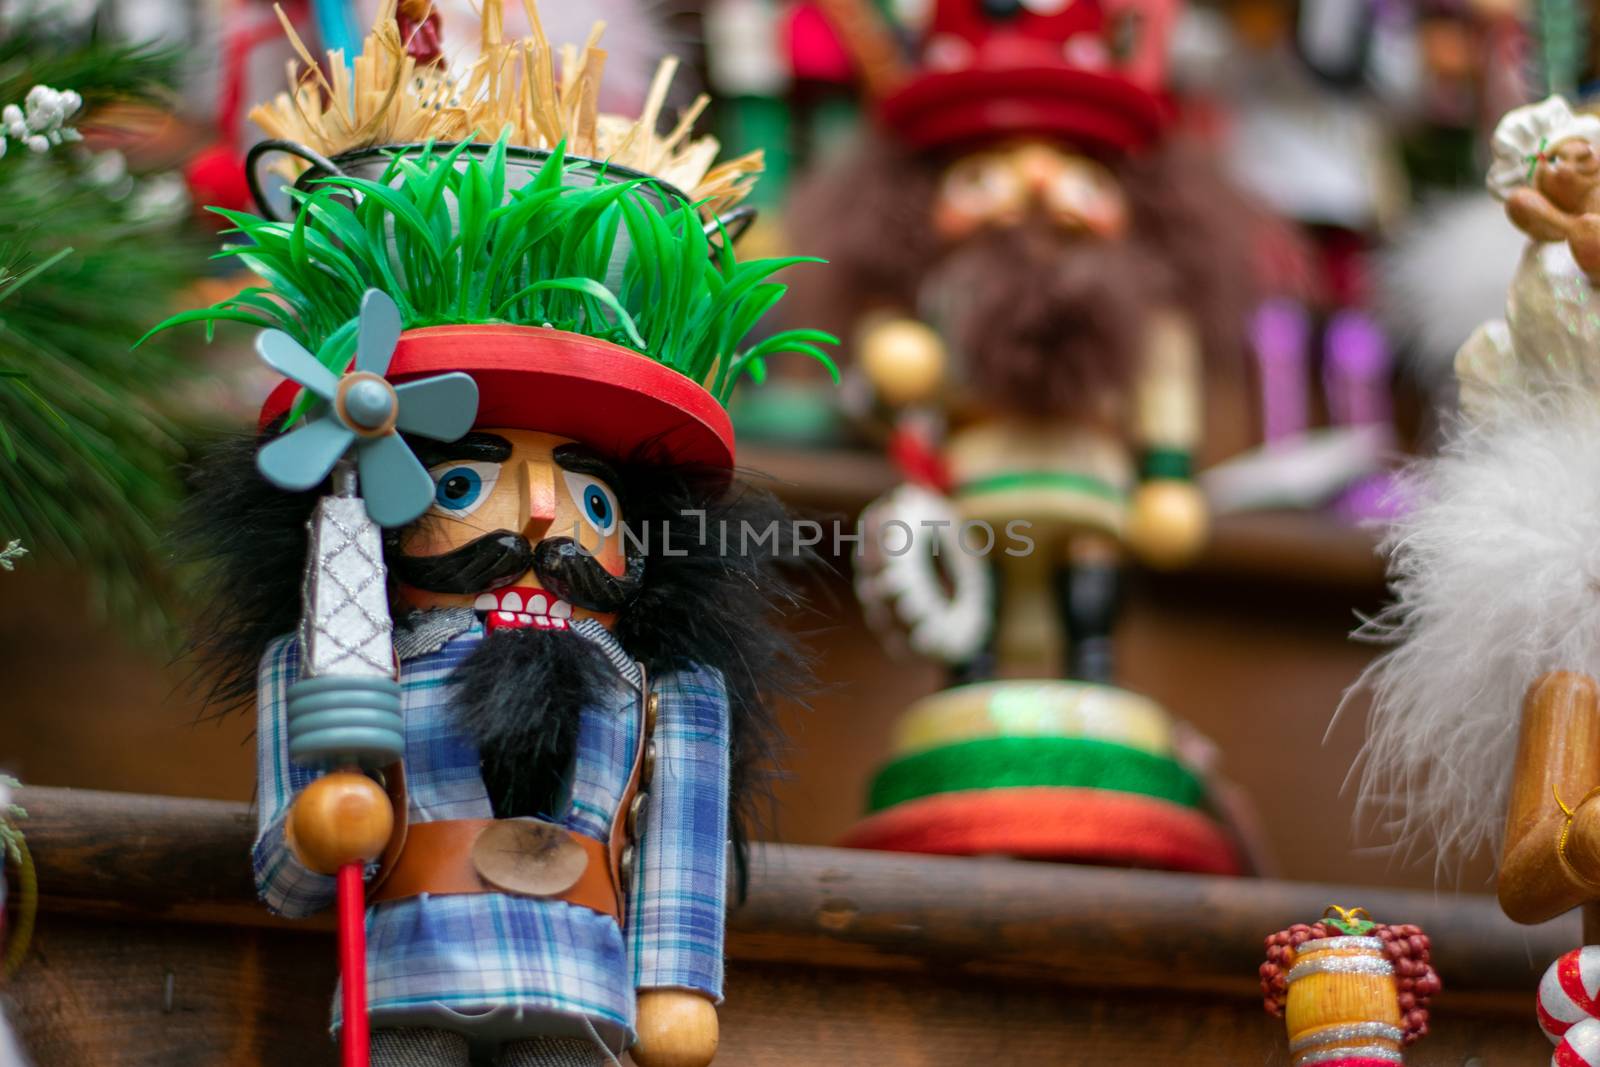 A Funny Looking Nutcracker on a Wooden Shelf In Line With Other Nutcrackers